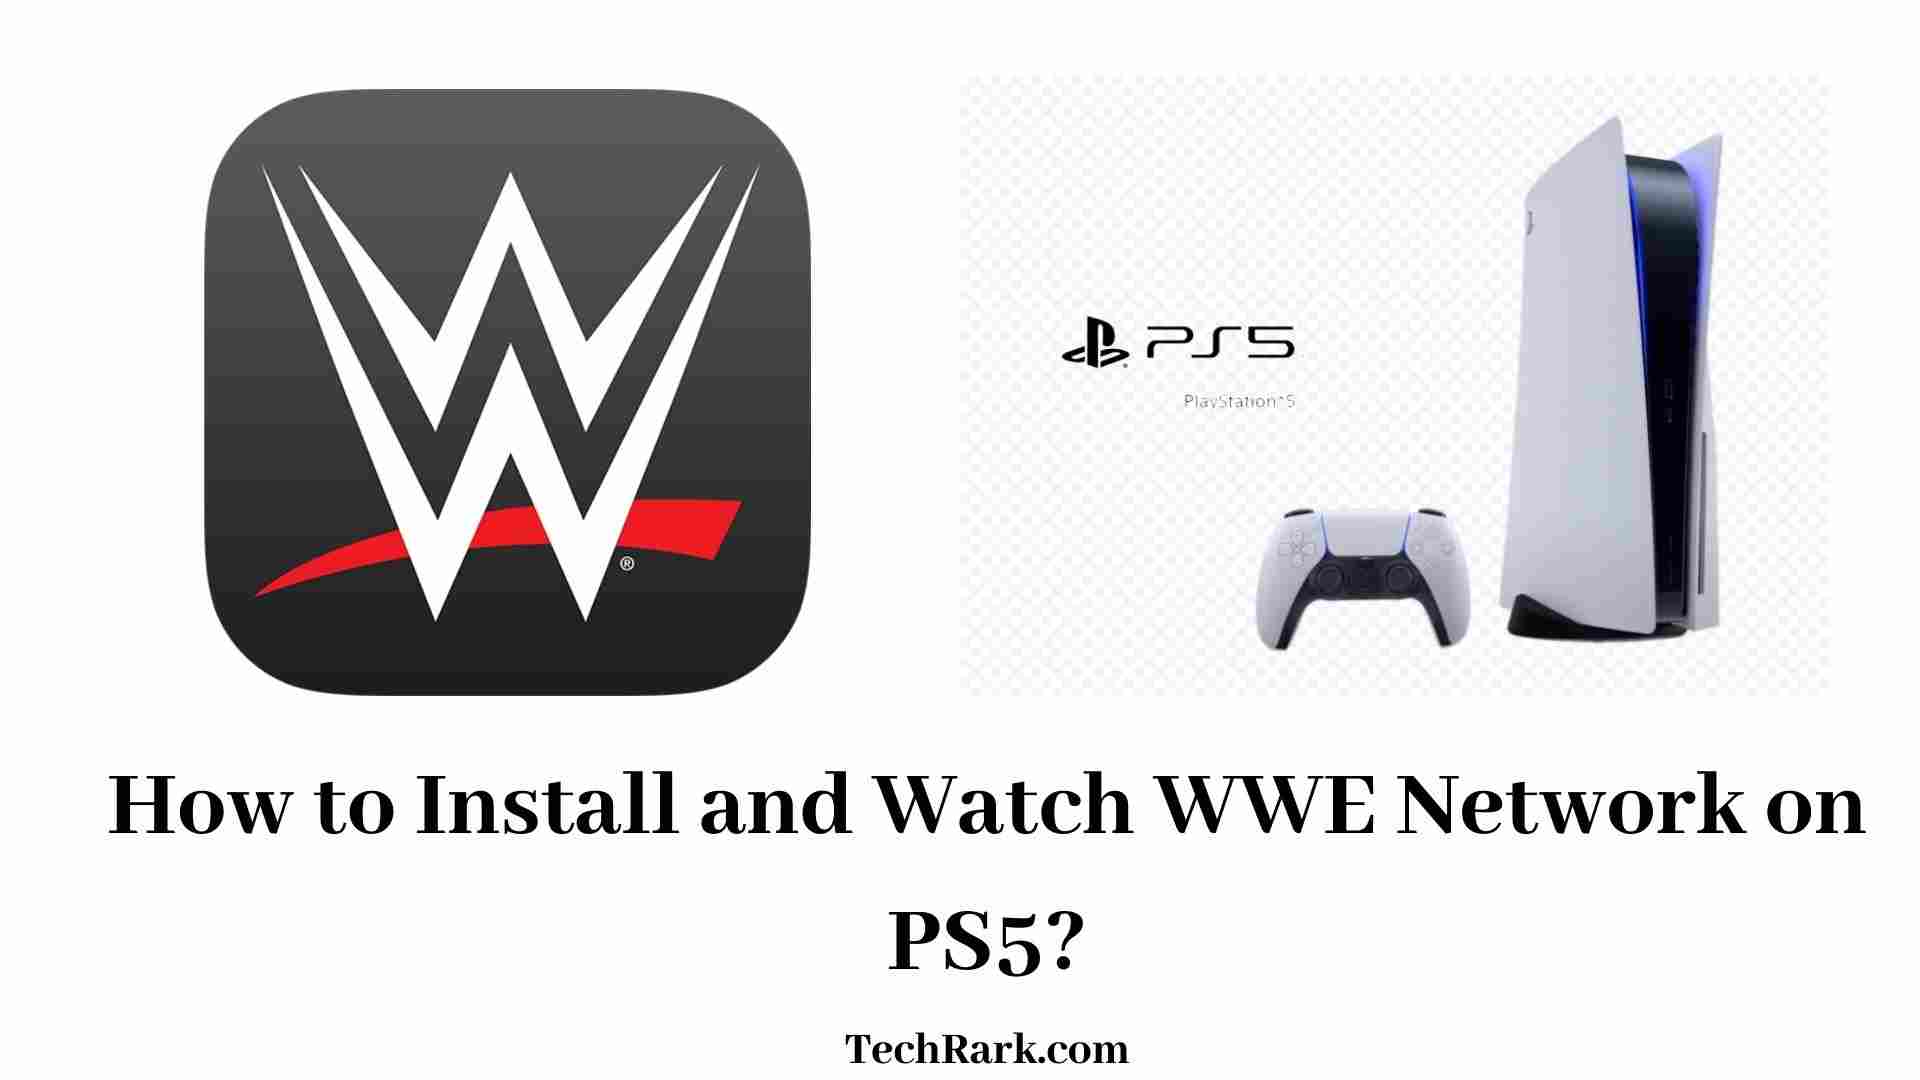 WWE on PS5